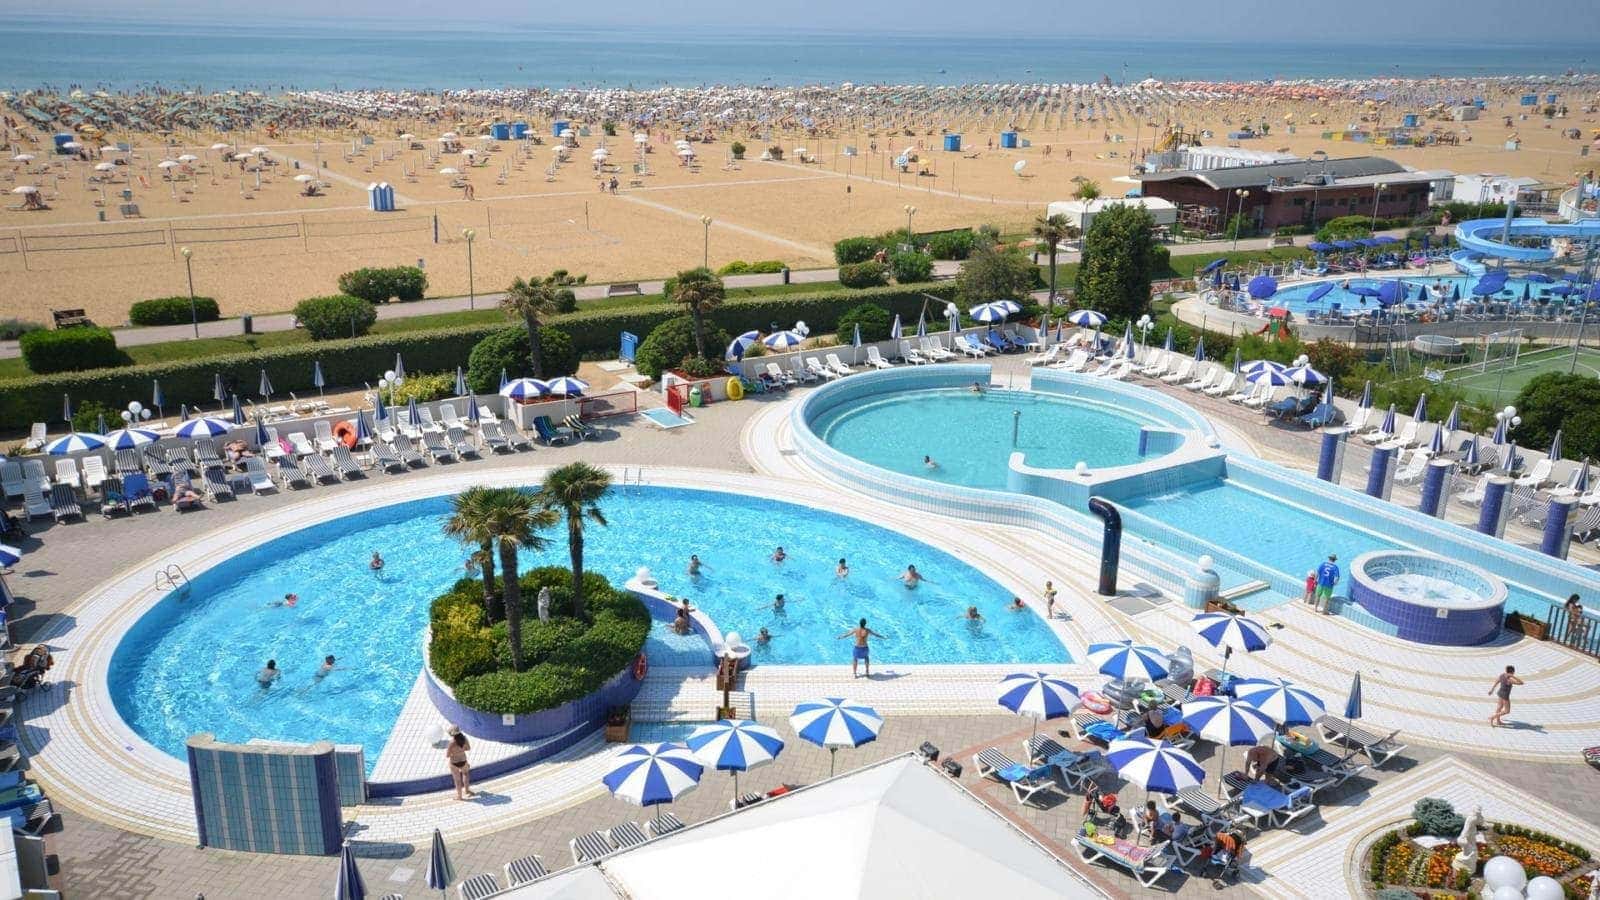 Beach Holiday with Kids – 5 Great things to do in Bibione, Italy